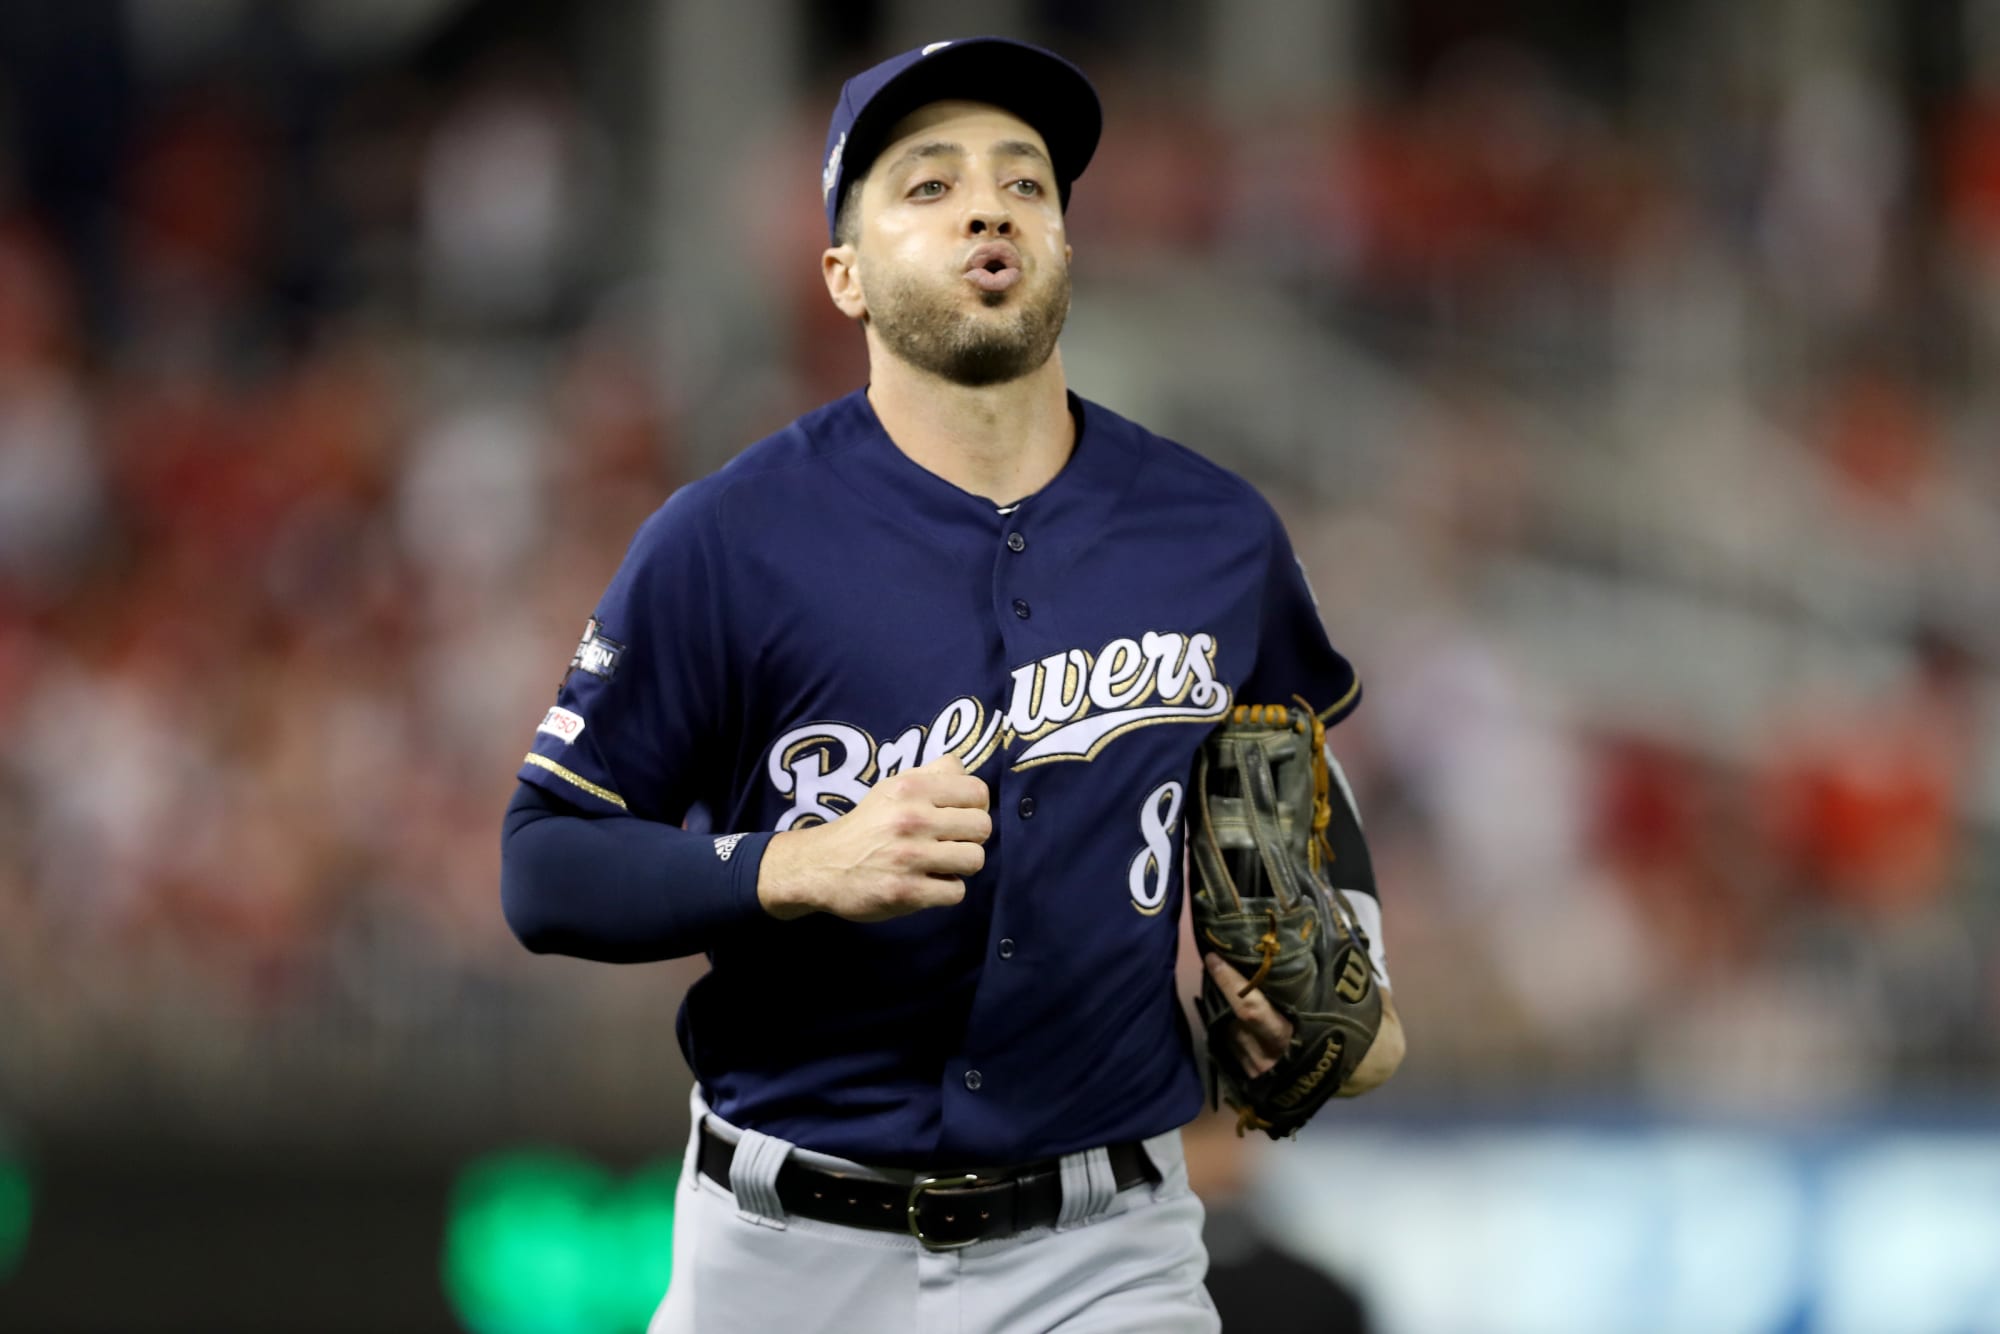 Ryan Braun is open to trying first base